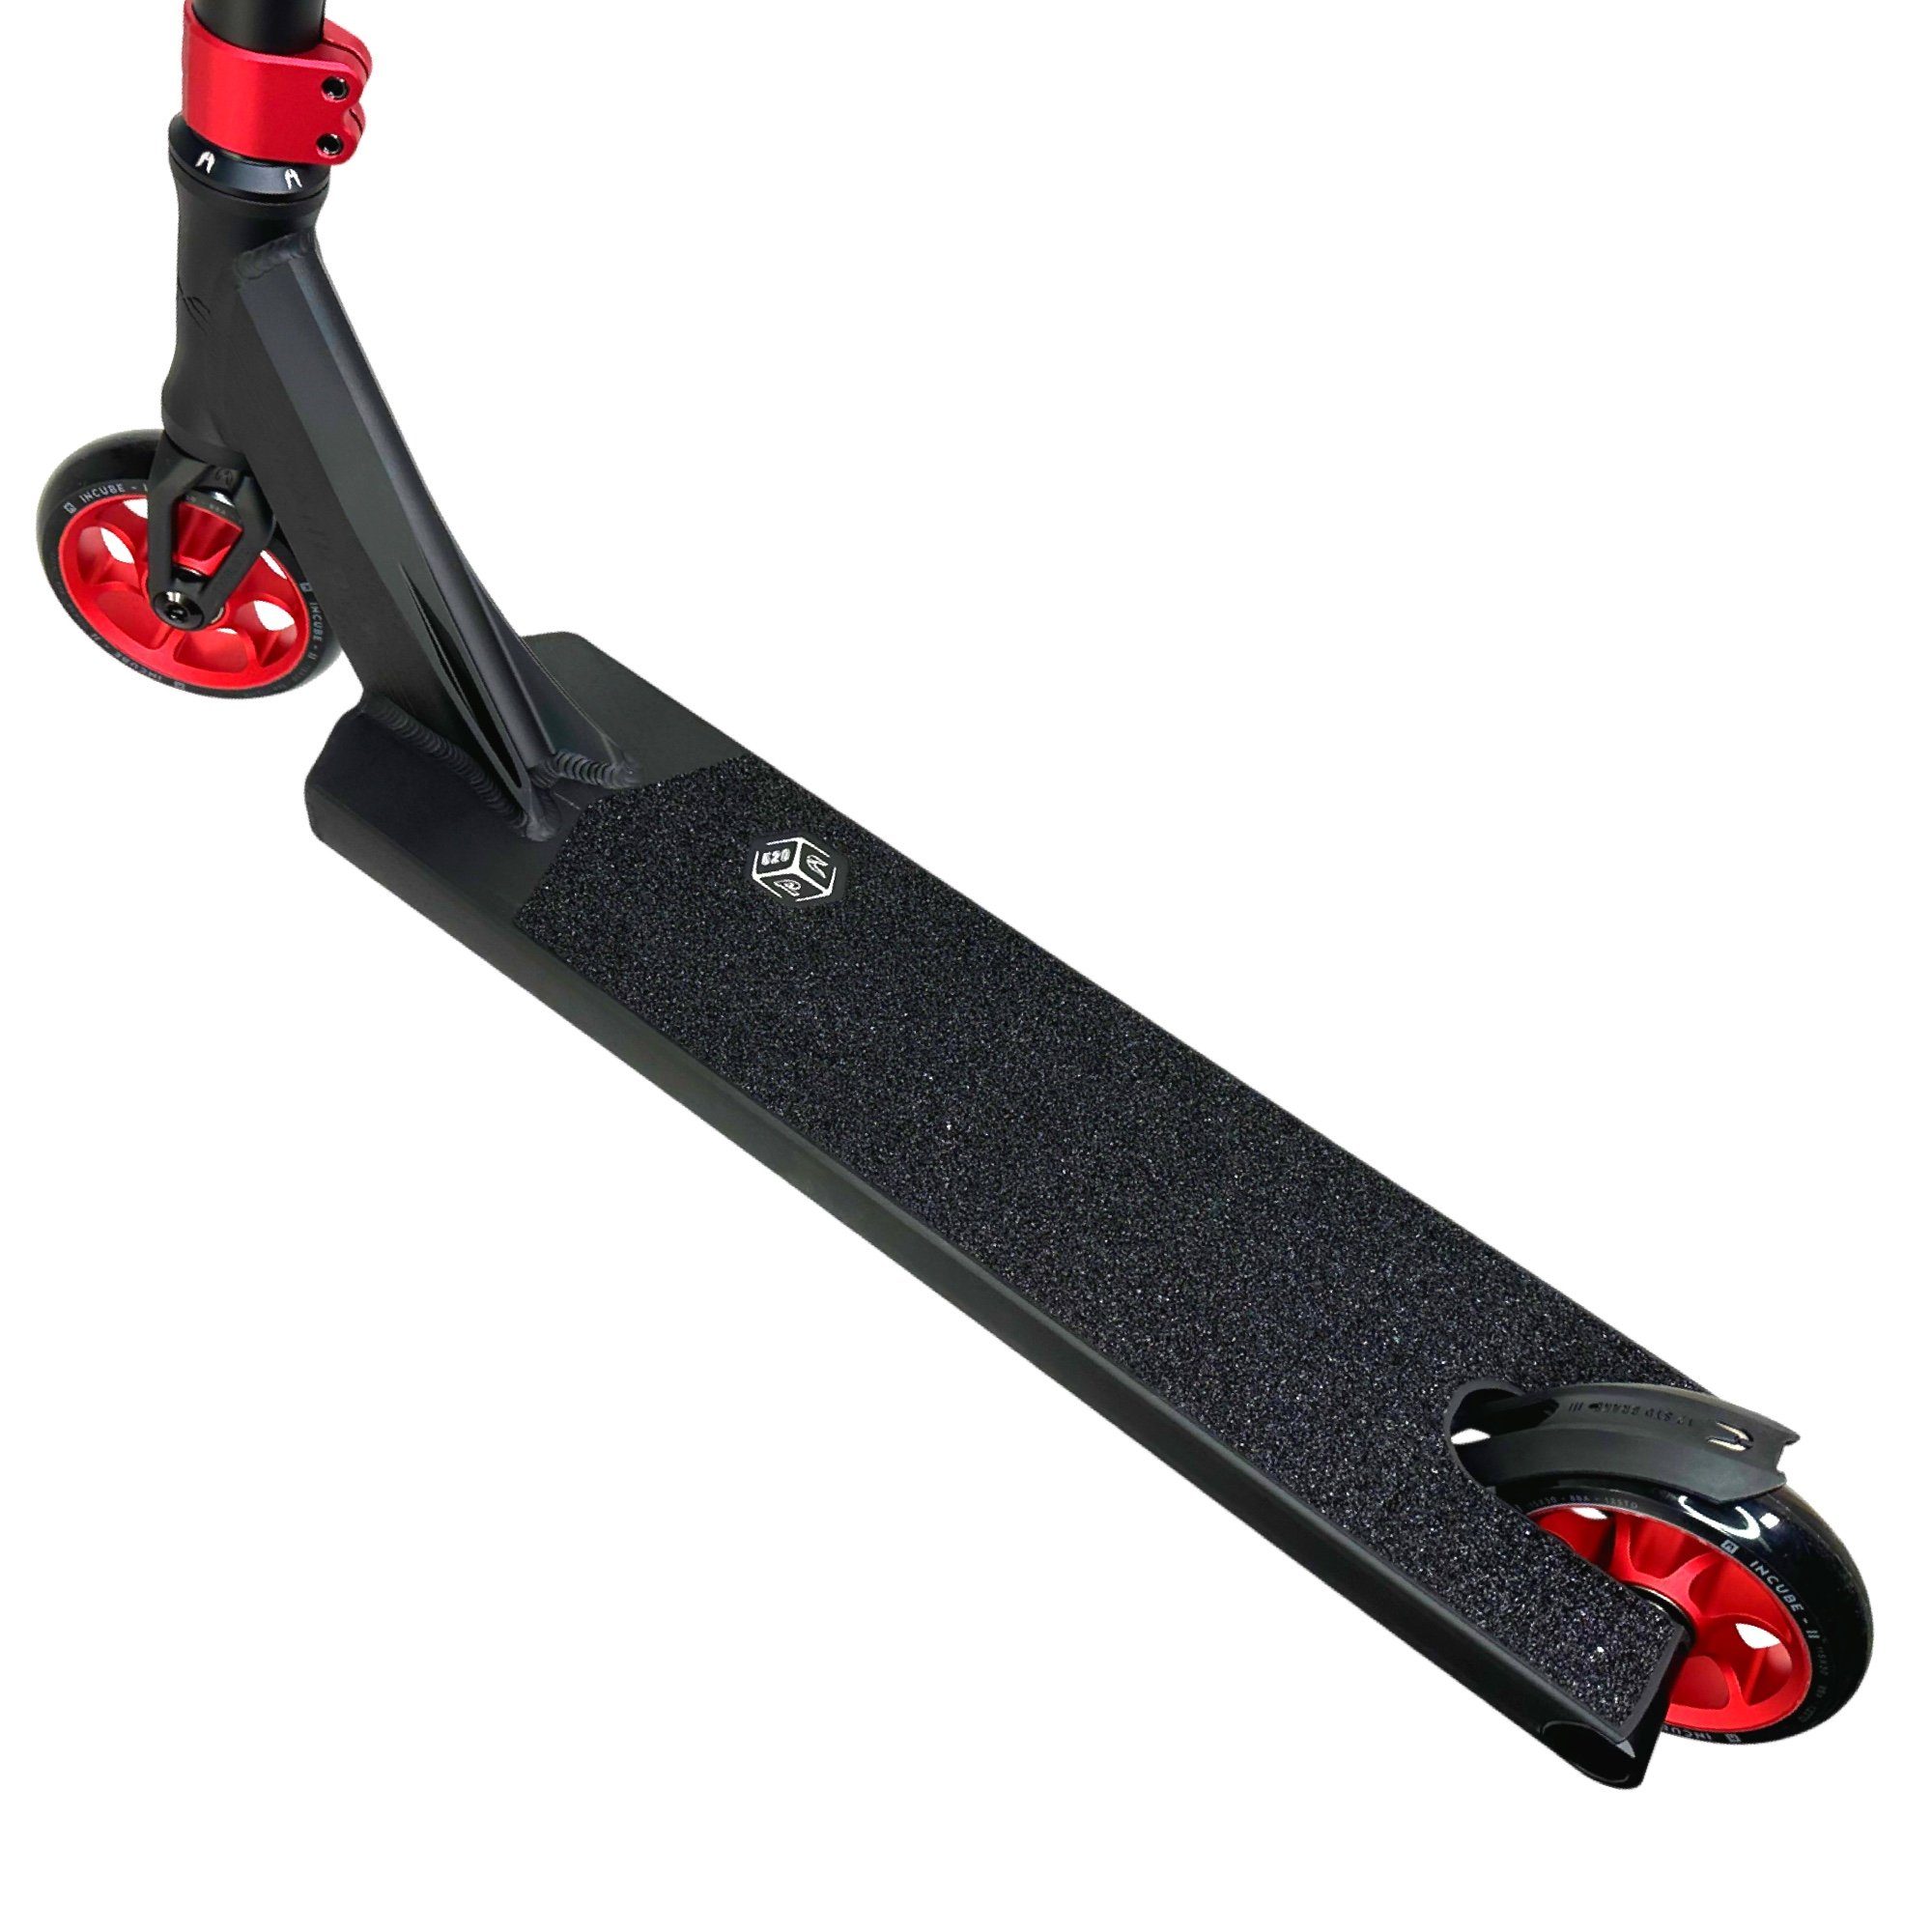 Stunt-Scooter Stuntscooter Ethic 3,4kg L DTC Ethic H=90cm Rot DTC Pandora